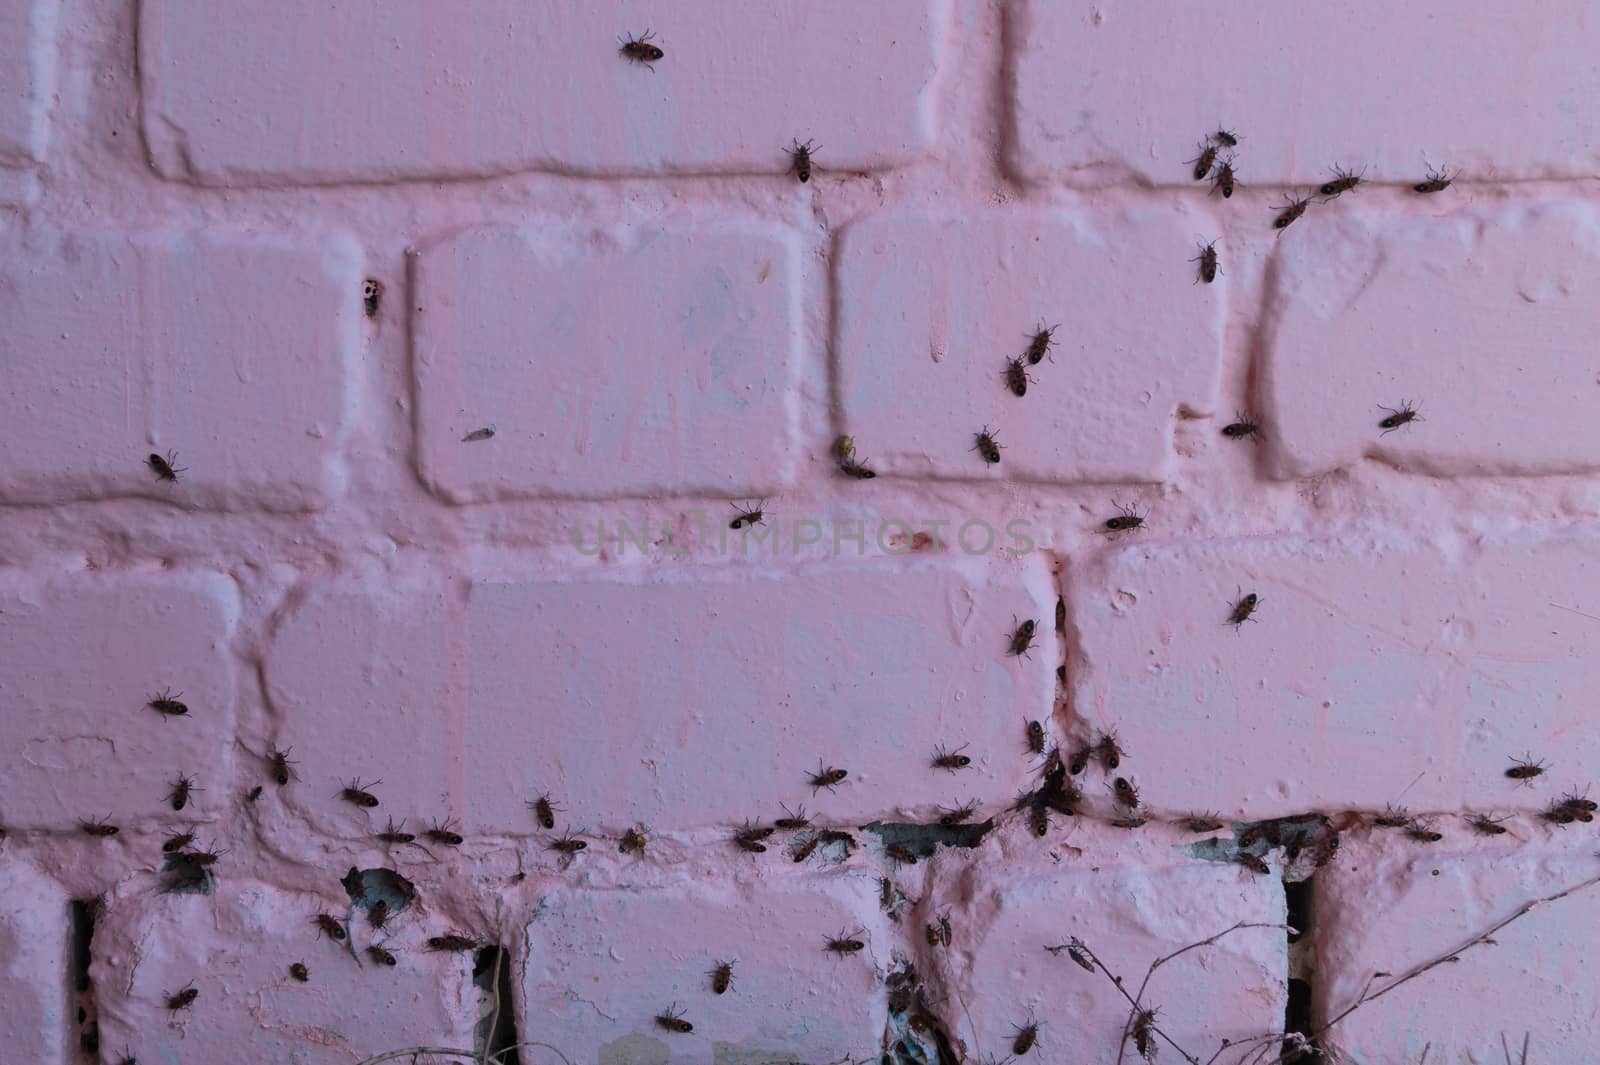 A lot of redbugs on pink wall with blurred background. by alexsdriver